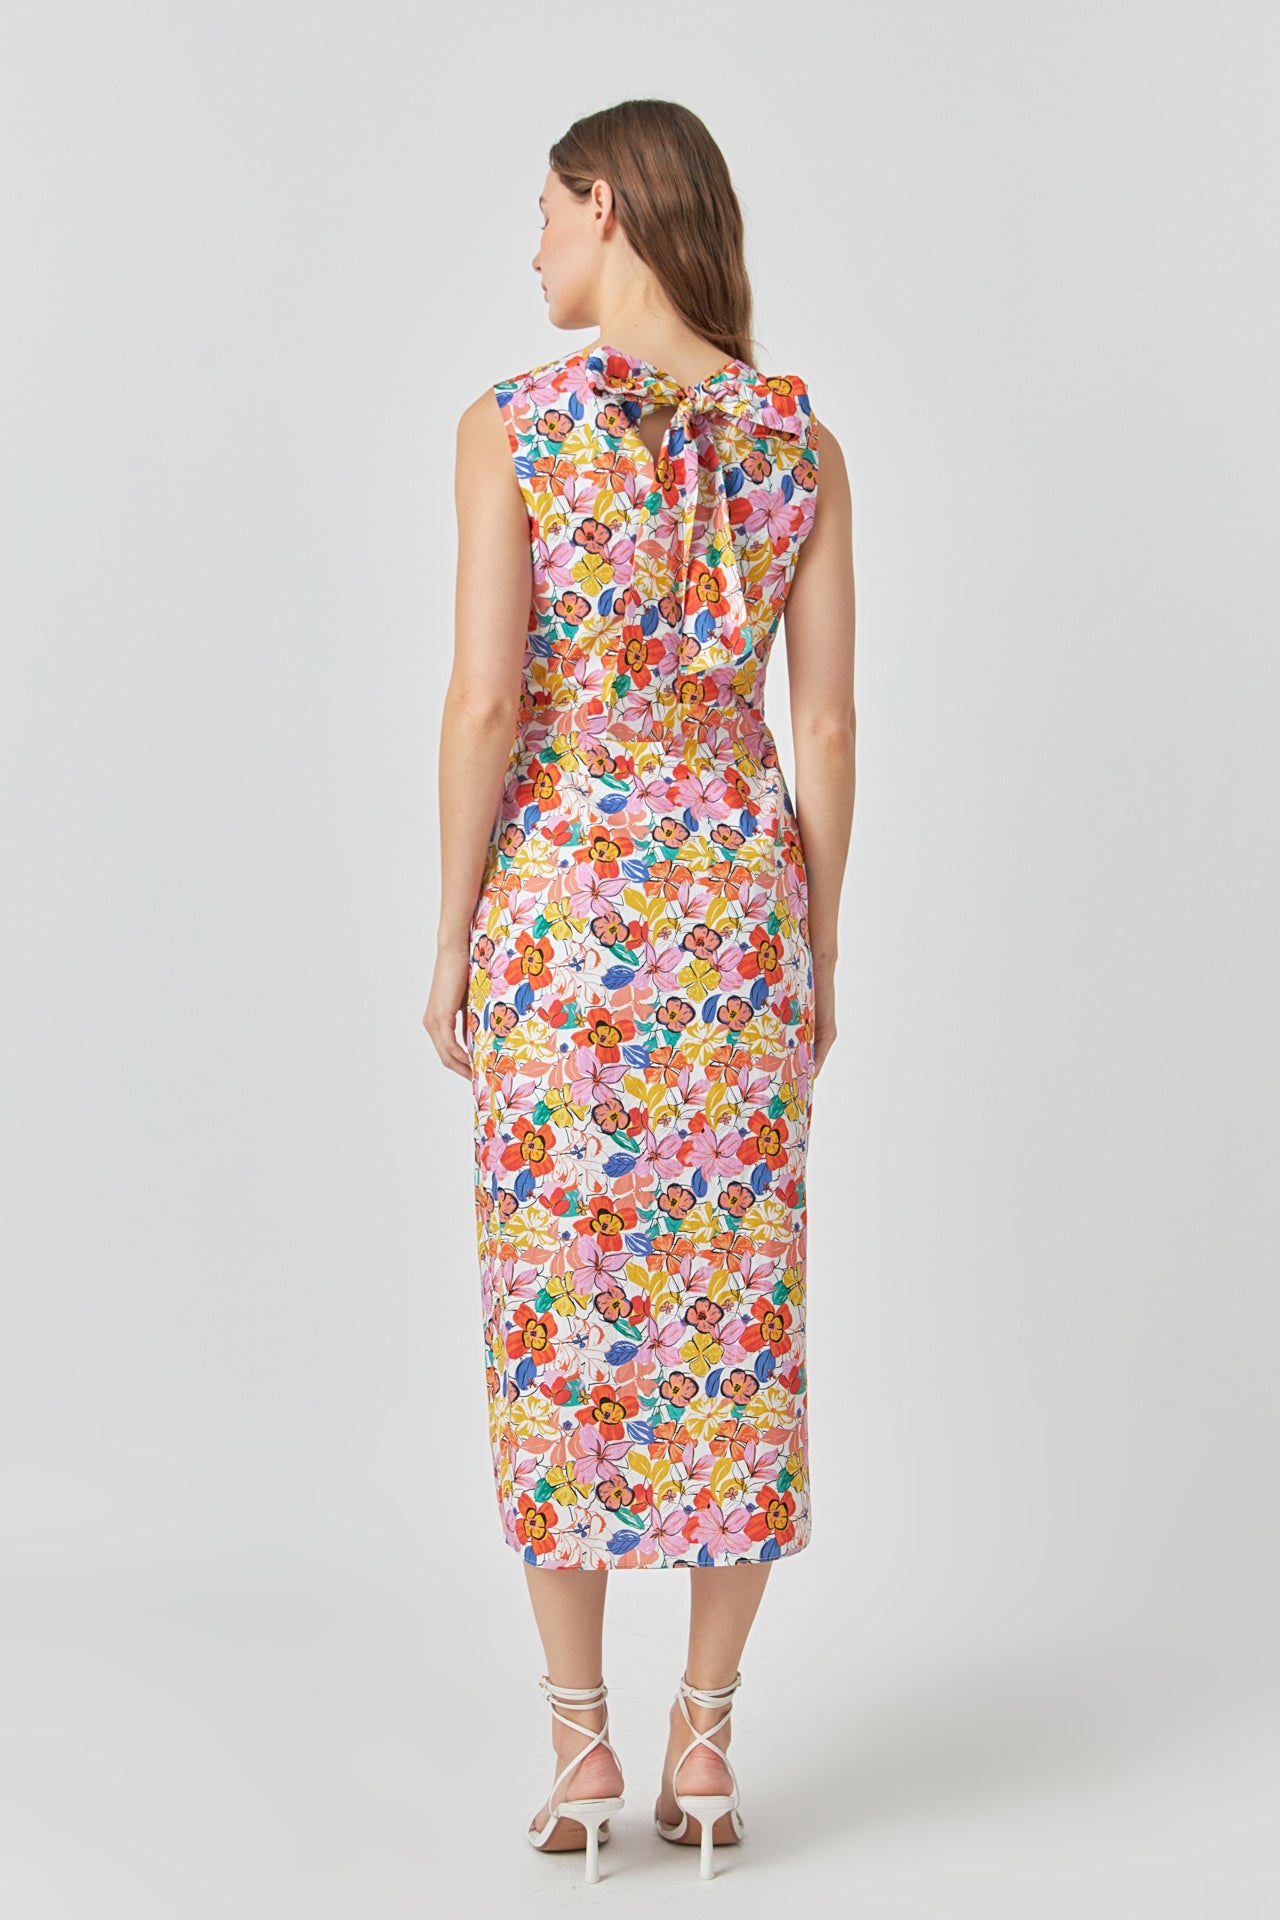 ENDLESS ROSE - Cotton Floral Print Cutout Maxi Dress - DRESSES available at Objectrare